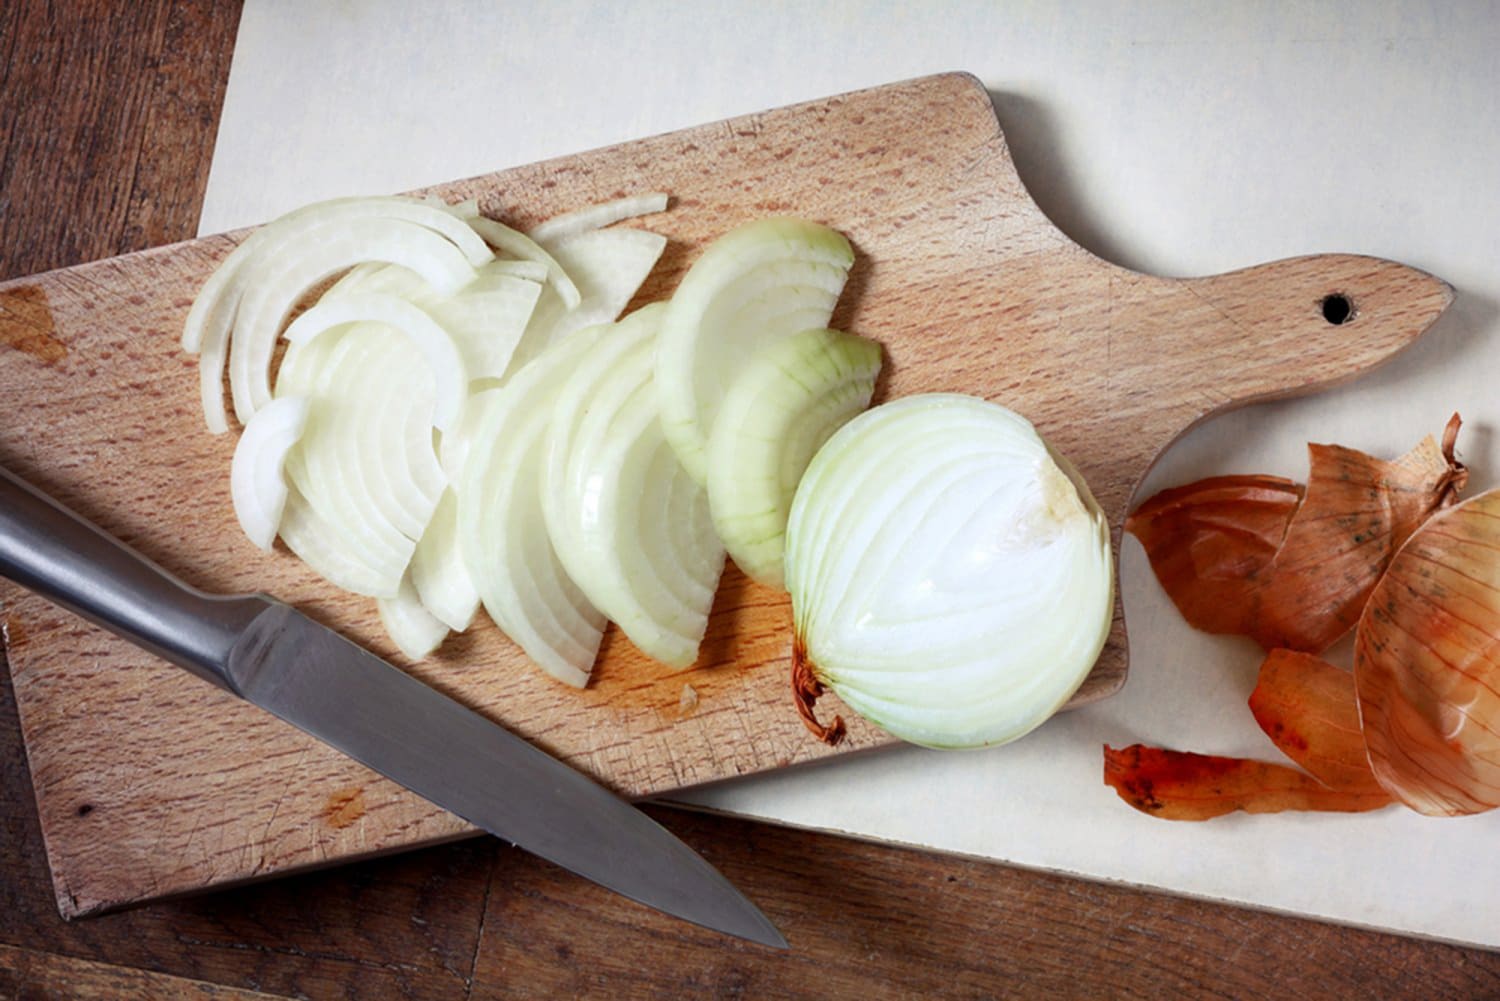 Onions that won't make you cry are here — and they're called 'Sunions